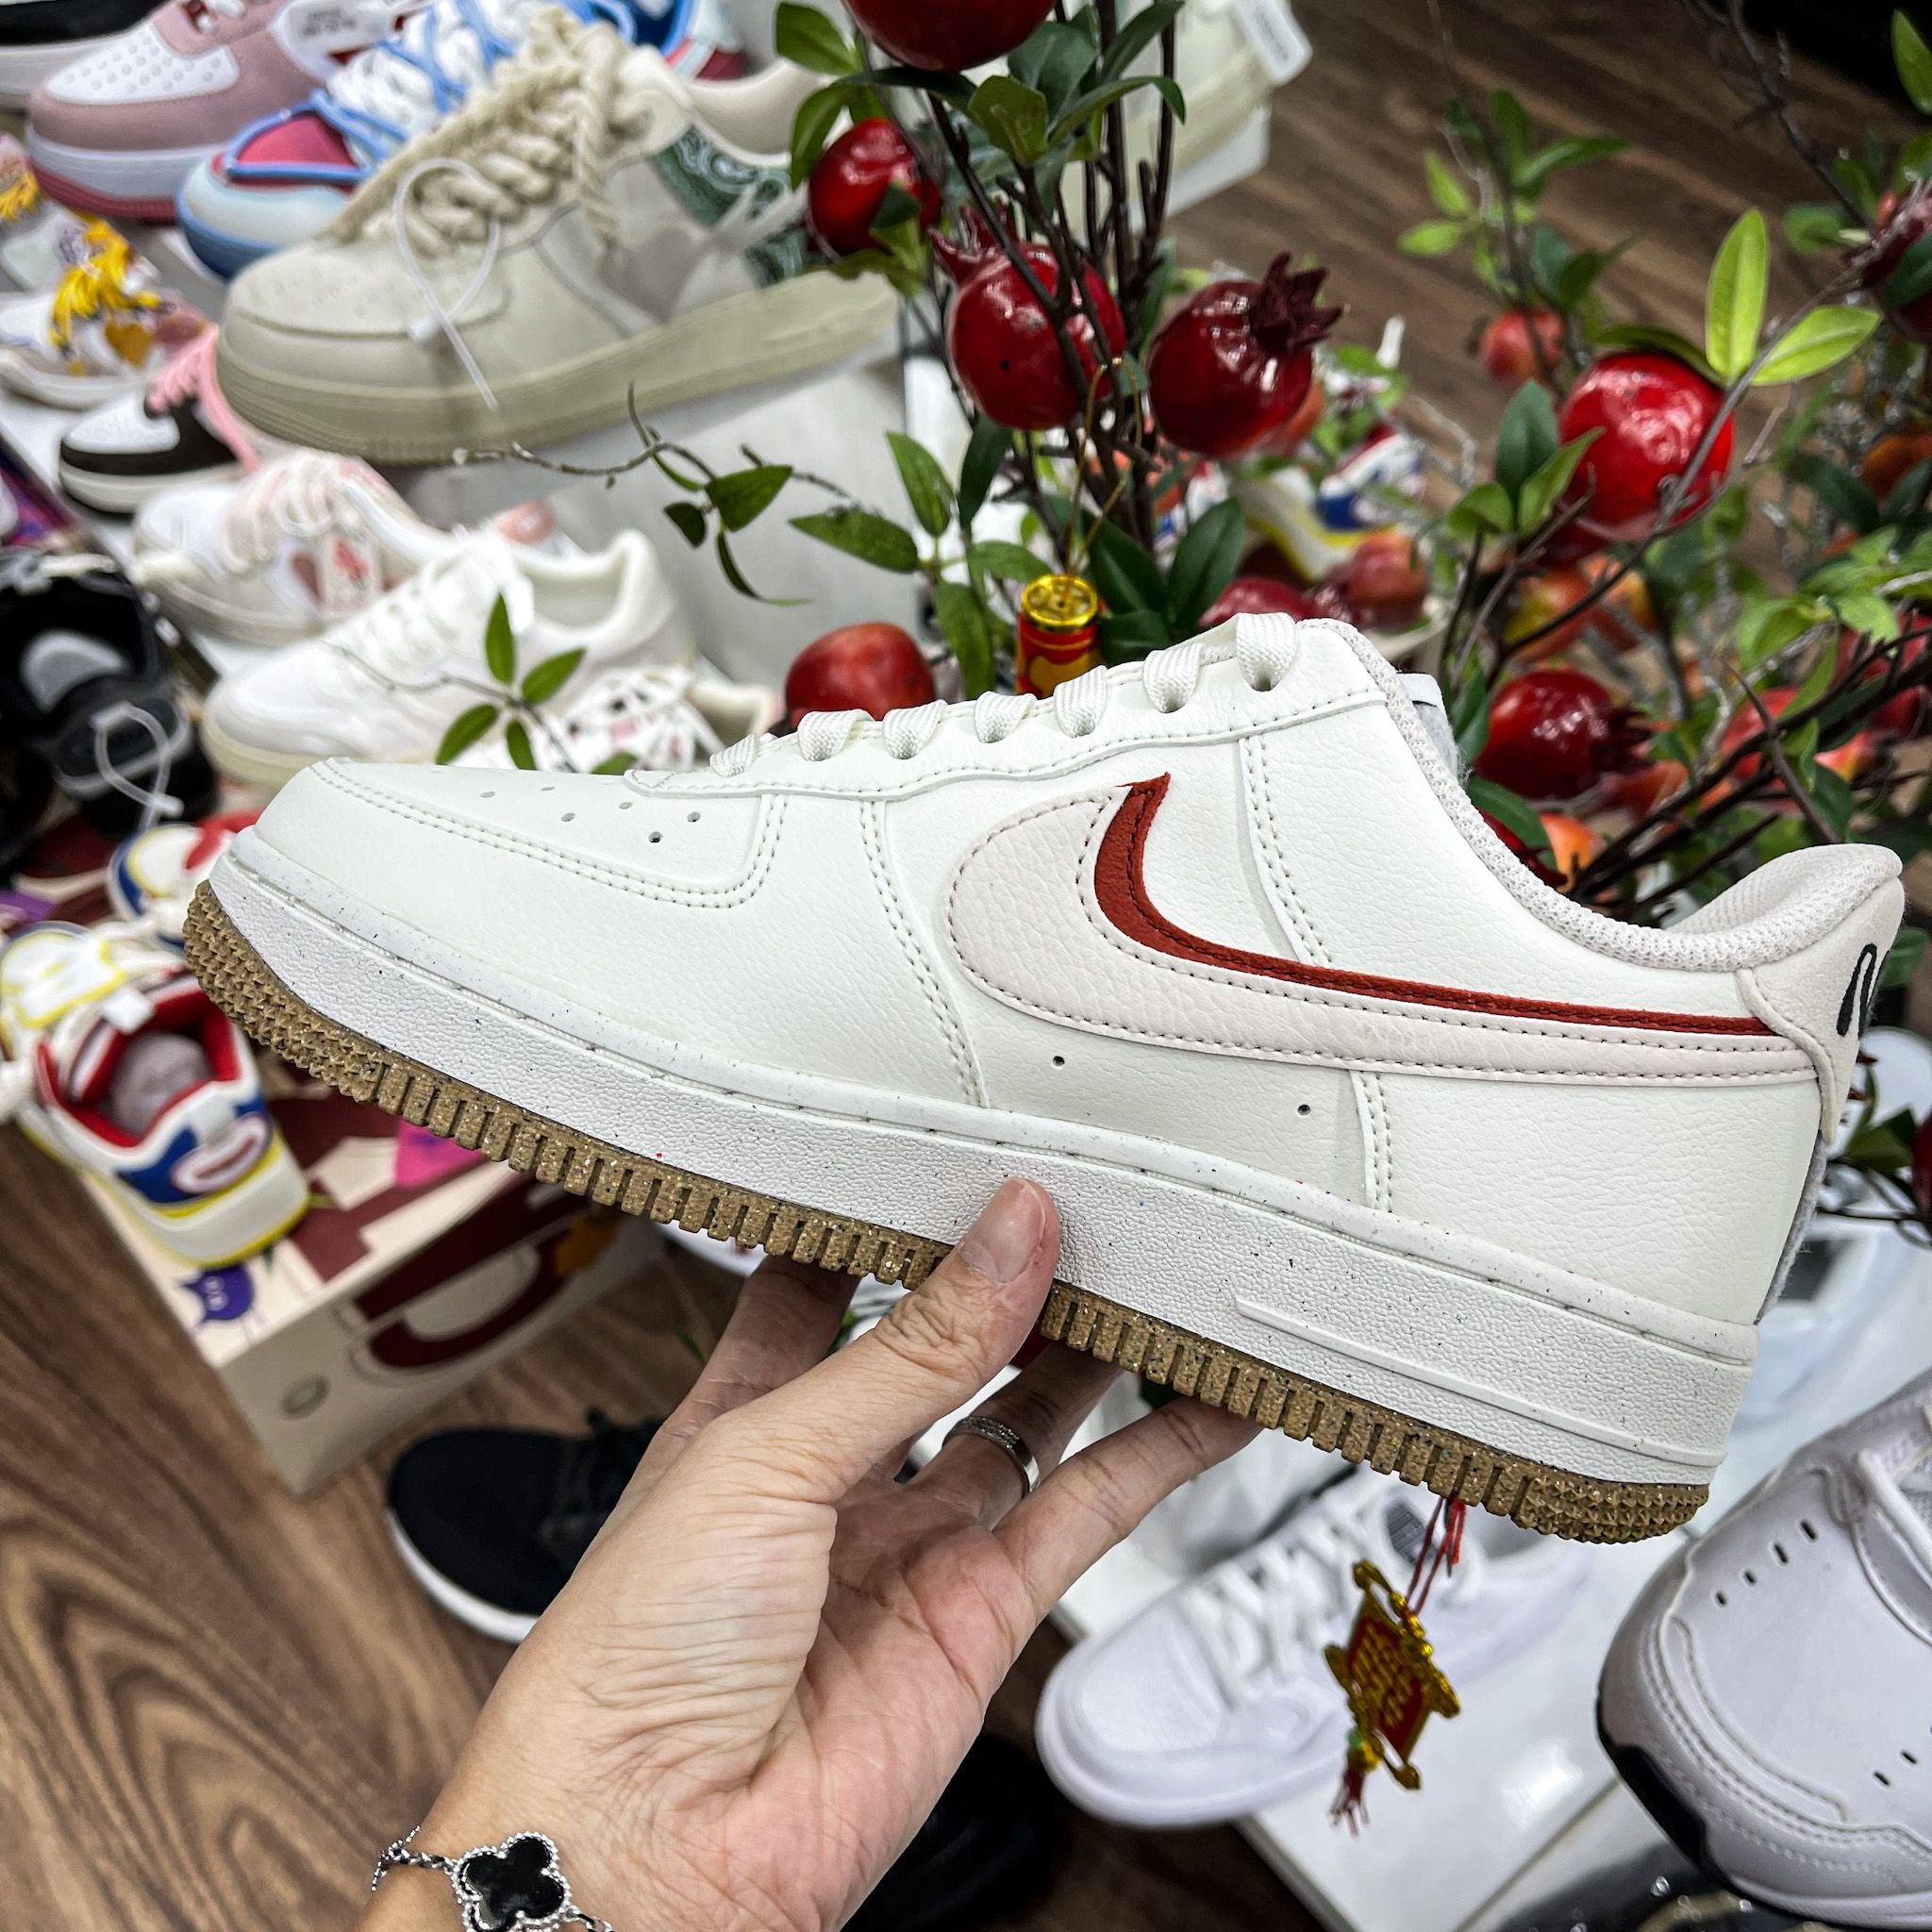 Nike Air Force 1 Low 82 DX6065-101